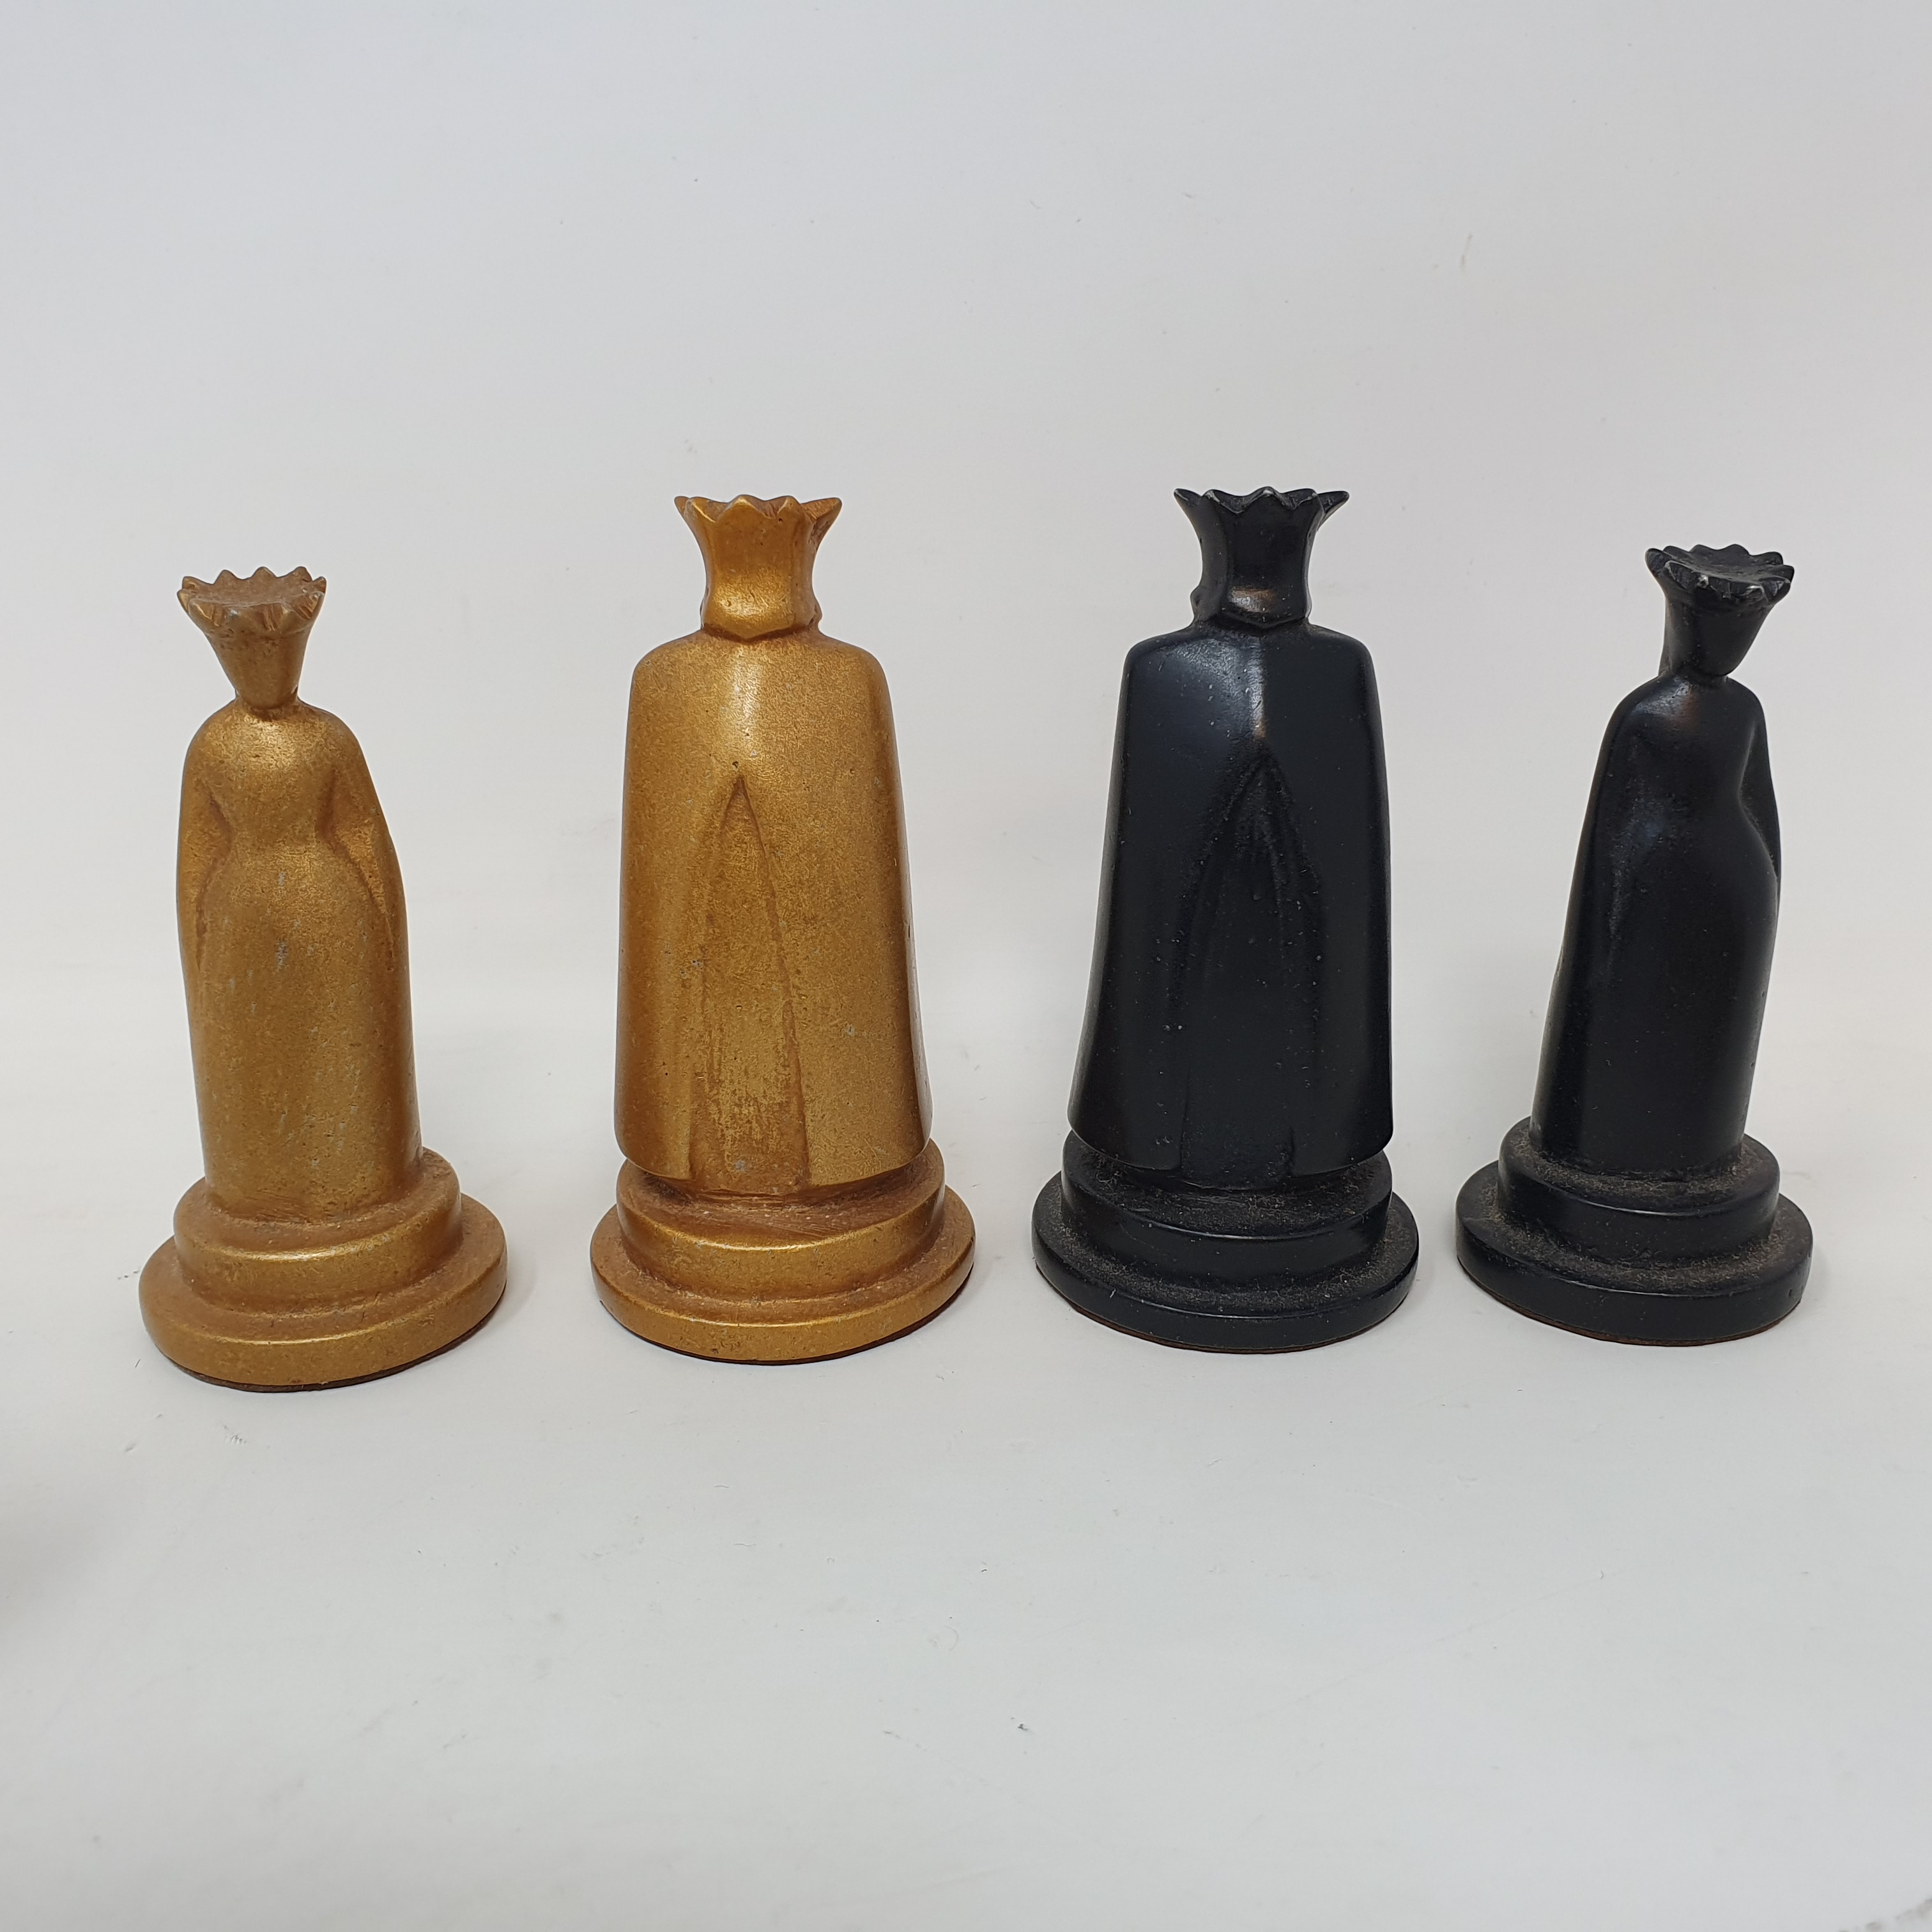 A Modernist chess set, by repute cast from aluminium/duralumin from a Spitfire, the king 8.5 cm high - Image 7 of 7